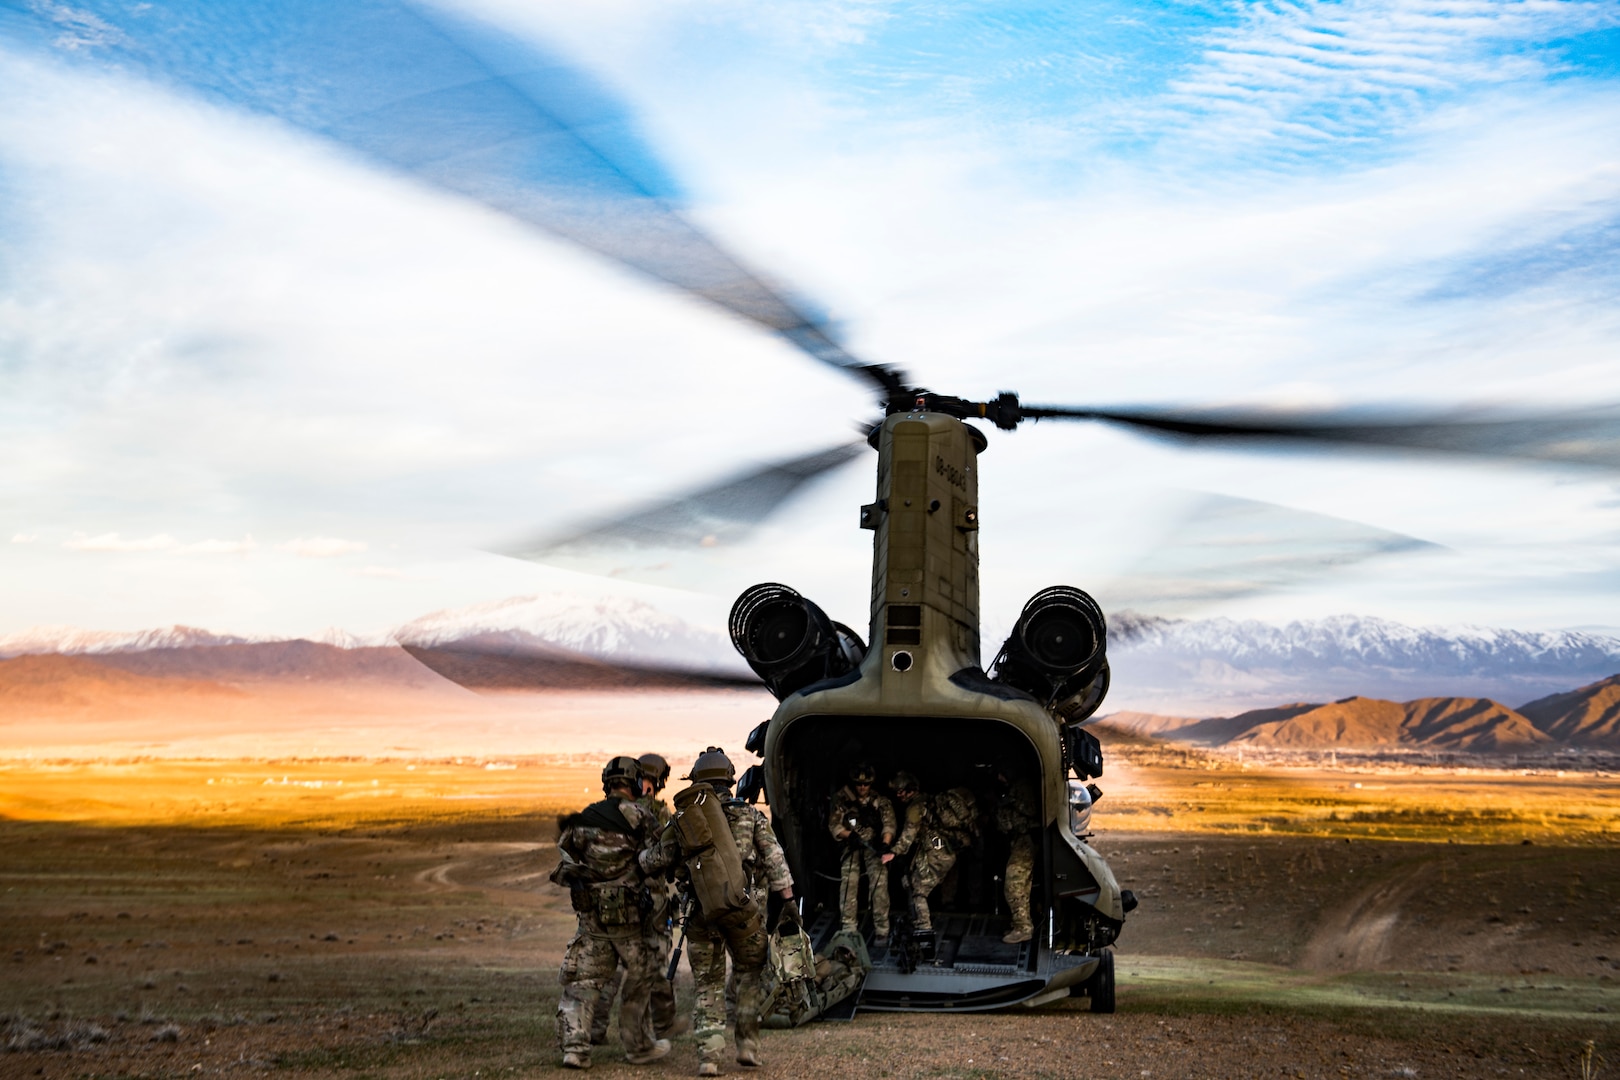 Air Force pararescuemen assigned to 83rd Expeditionary Rescue Squadron load simulated casualties on board CH-47F Chinook, flown by members of Army Task Force Brawler, during personnel recovery exercise, Afghanistan, March 6, 2018 (U.S. Air Force/Gregory Brook)